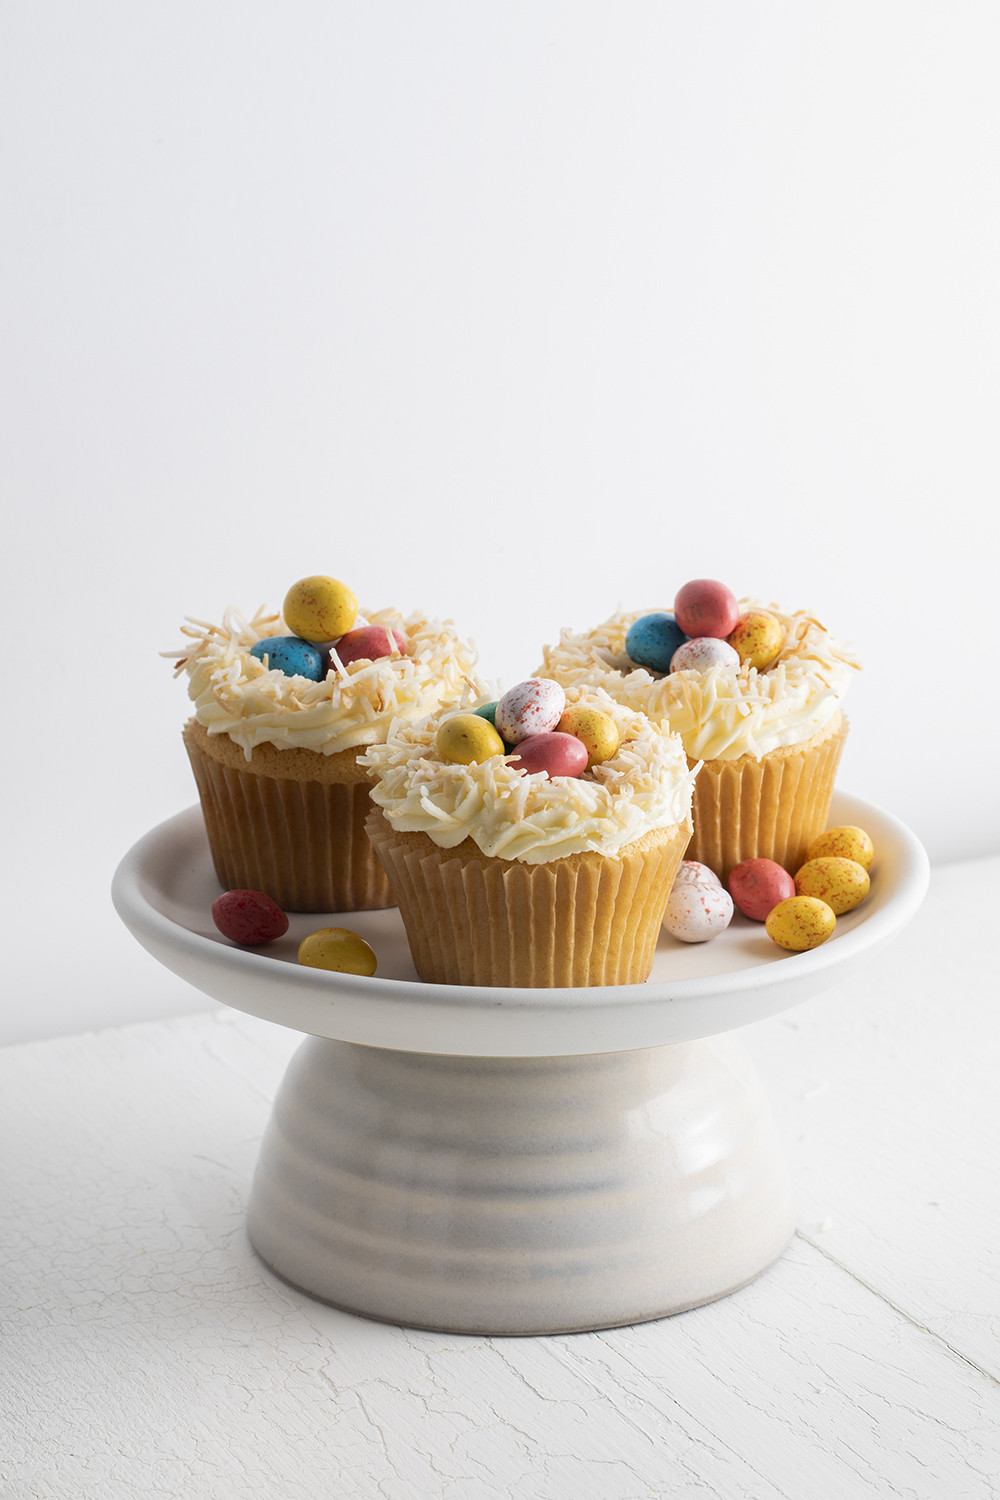 Cupcakes For Easter
 Try out this delicious Easter Cupcakes recipe from New World